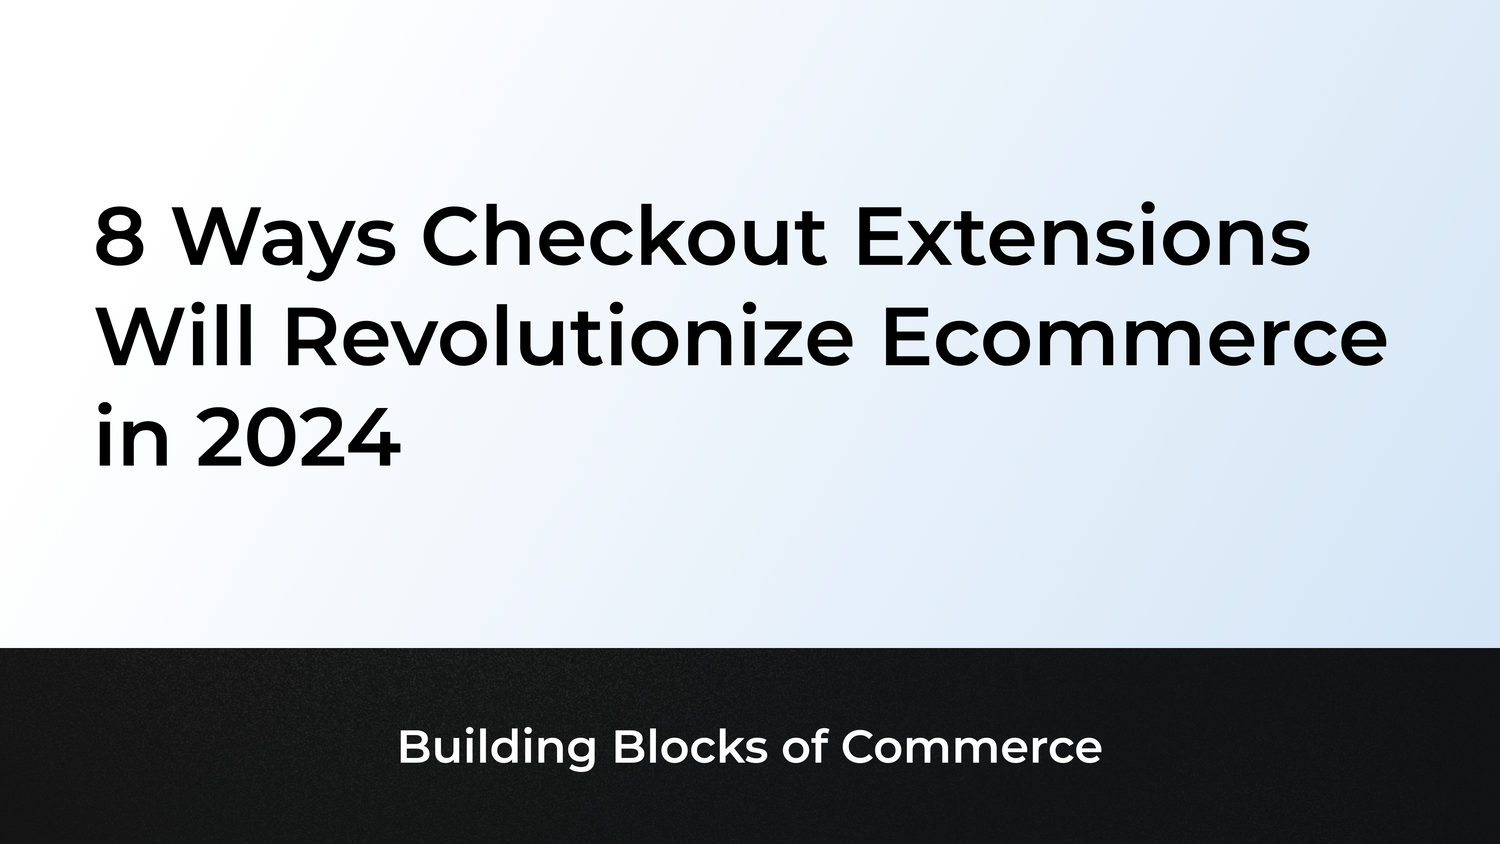 8 Ways Checkout Extensions Will Revolutionize Ecommerce in 2024